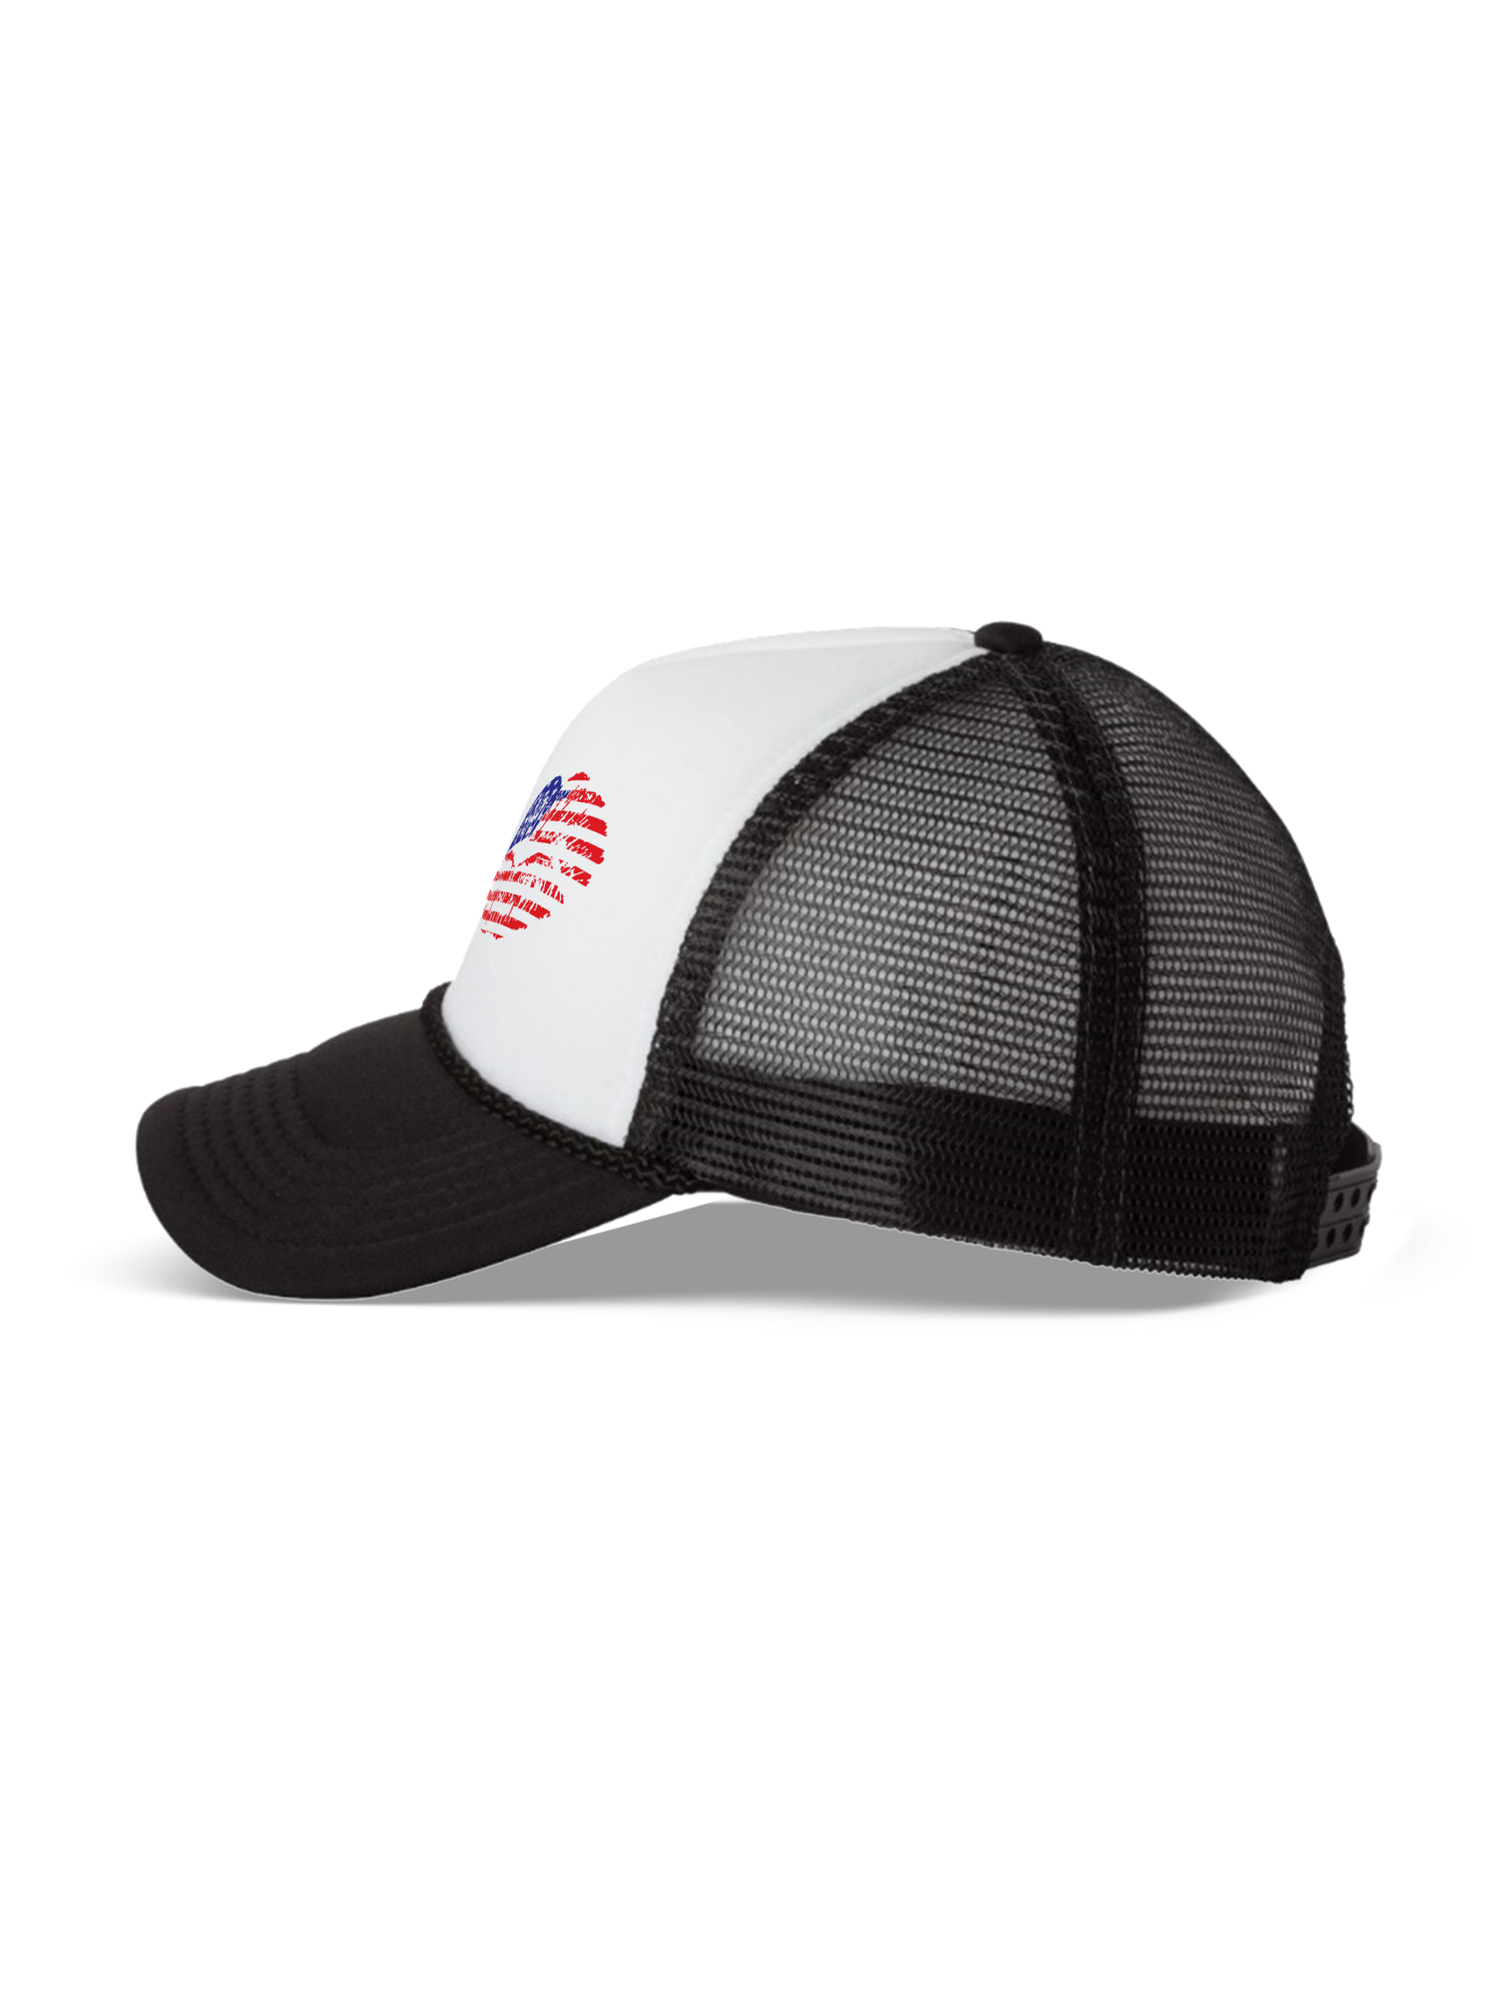 Awkward Styles American Lips Trucker Hat USA Flag Hats for Women Men USA Gifts American Flag Hat USA Baseball Cap Patriotic Hat American Flag Men Women 4th of July Hat 4th of July Accessories - image 3 of 6